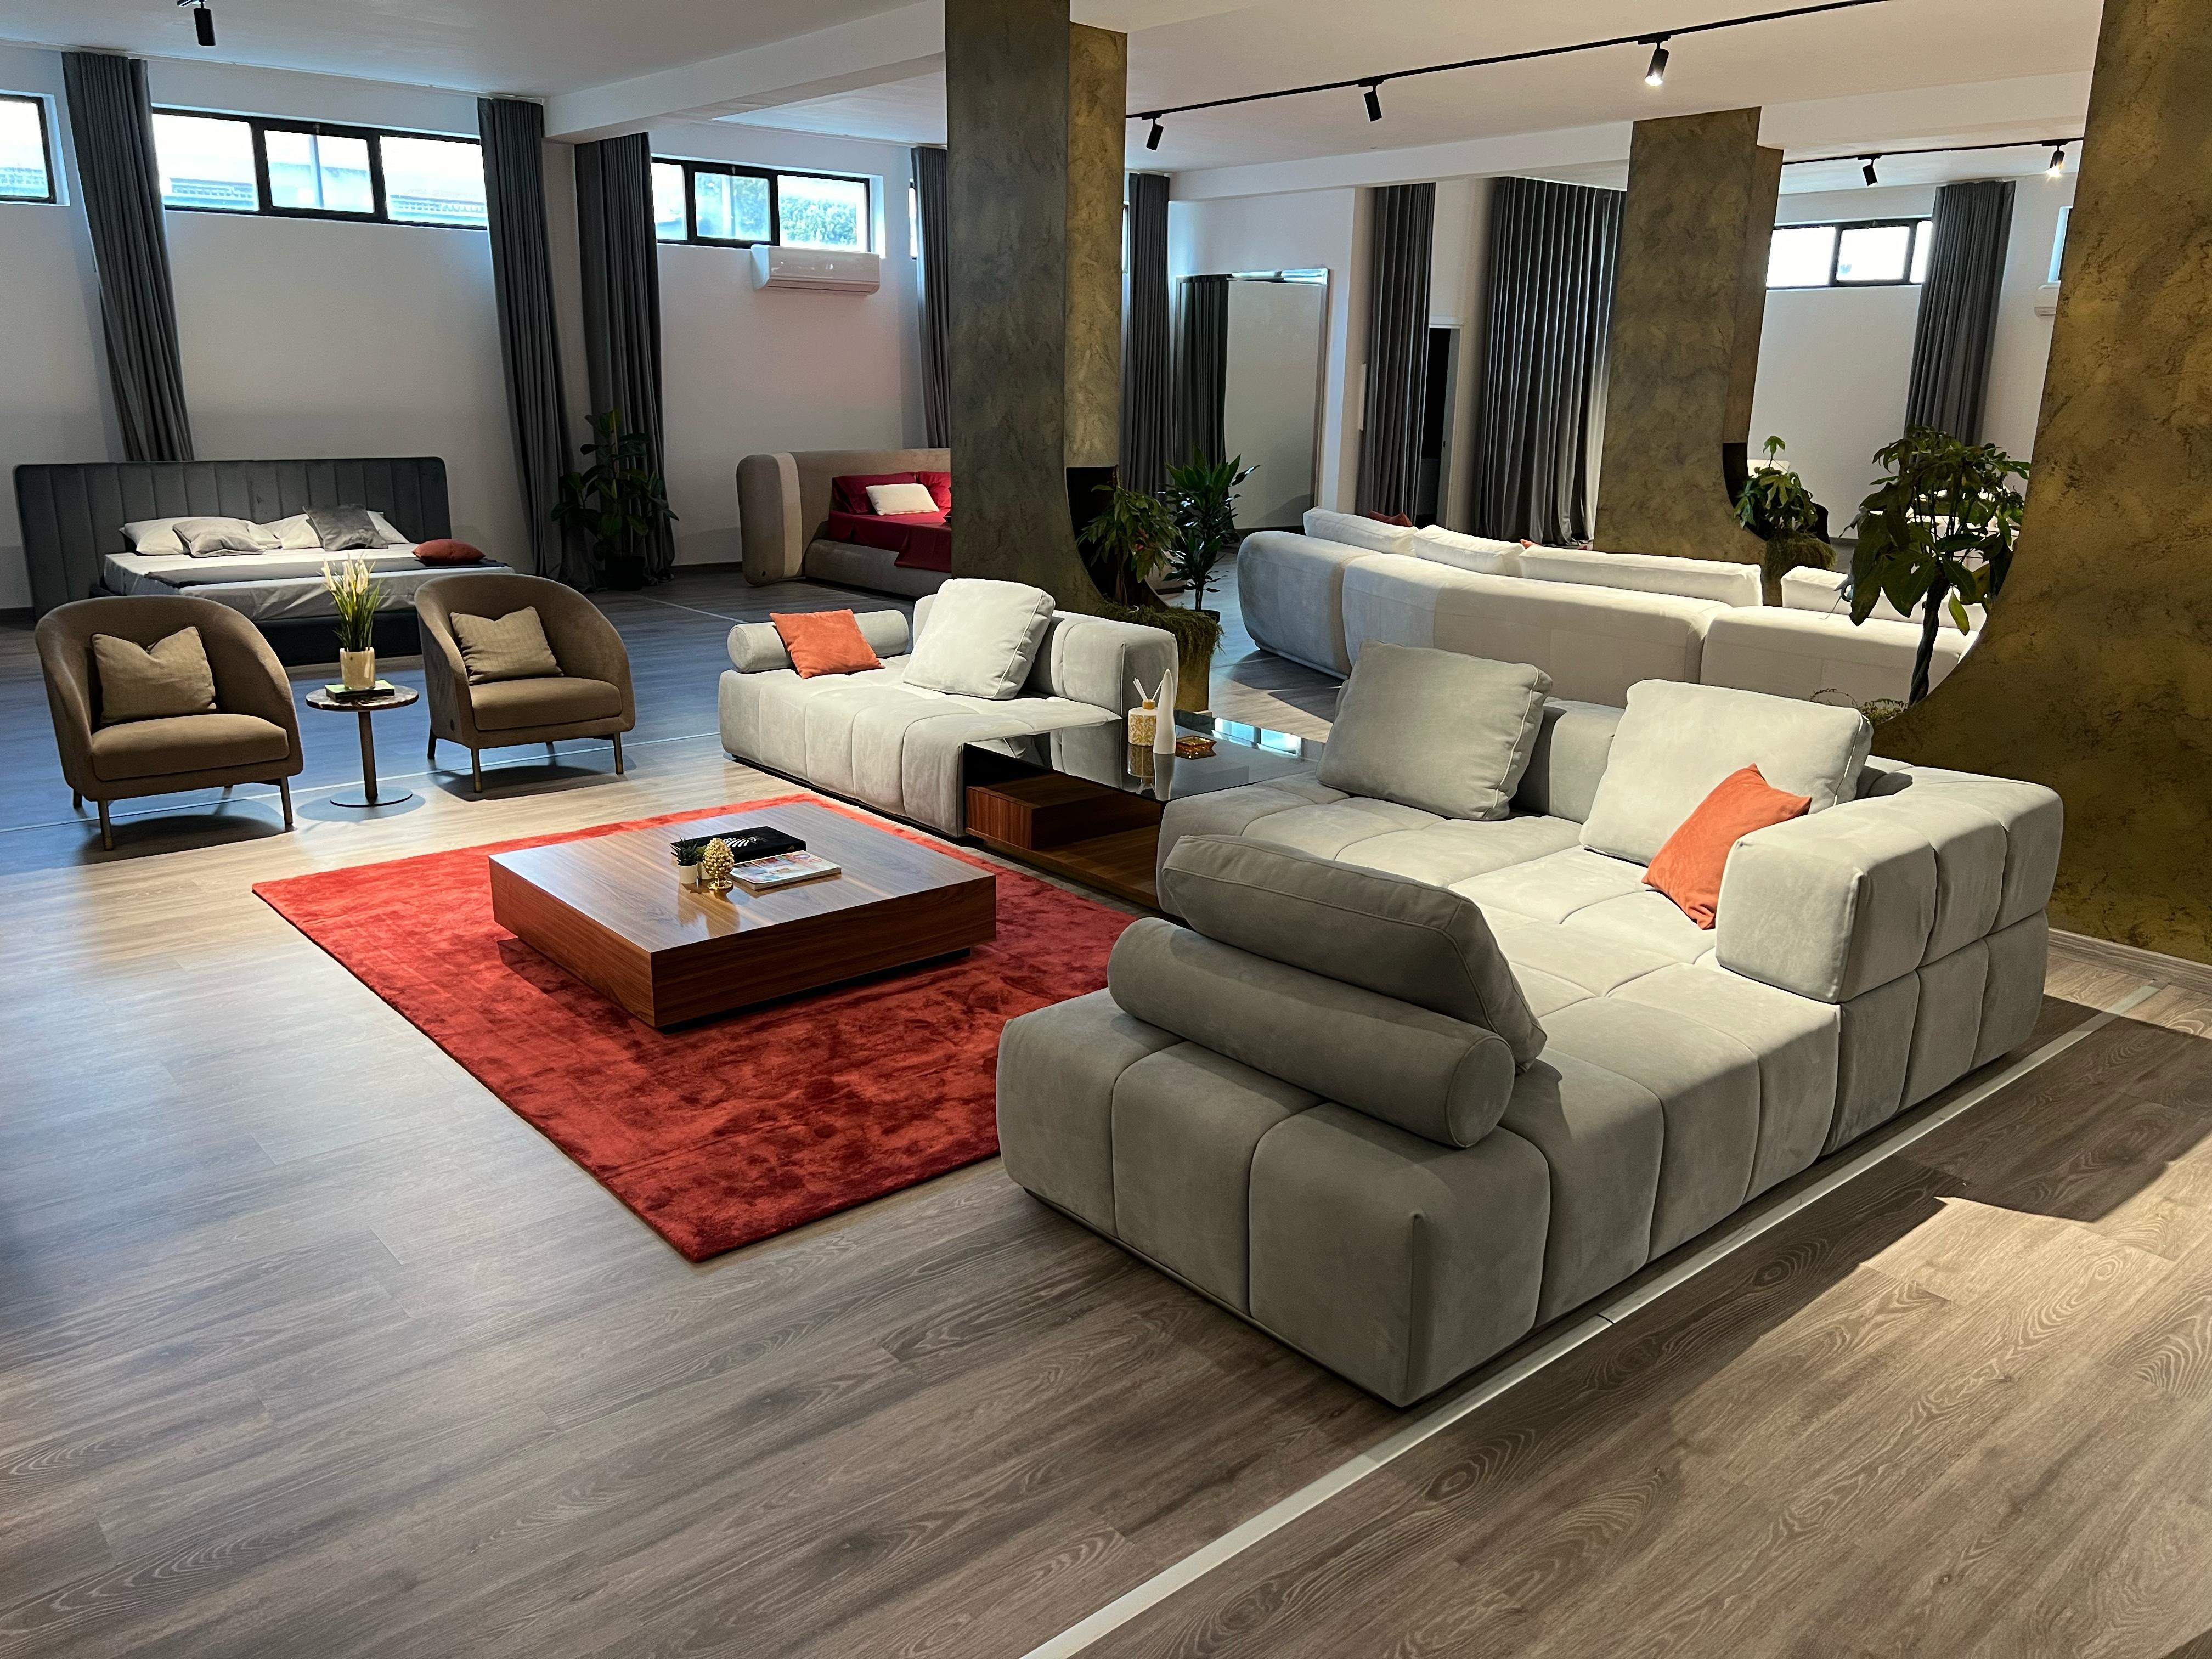 This sofa composed of infinite modules, gives the possibility to change its composition to your taste. How to play with a Lego. The petrol-colored nubuck leather sofa is just the right touch of elegance to add to your living room. 

The sofa is